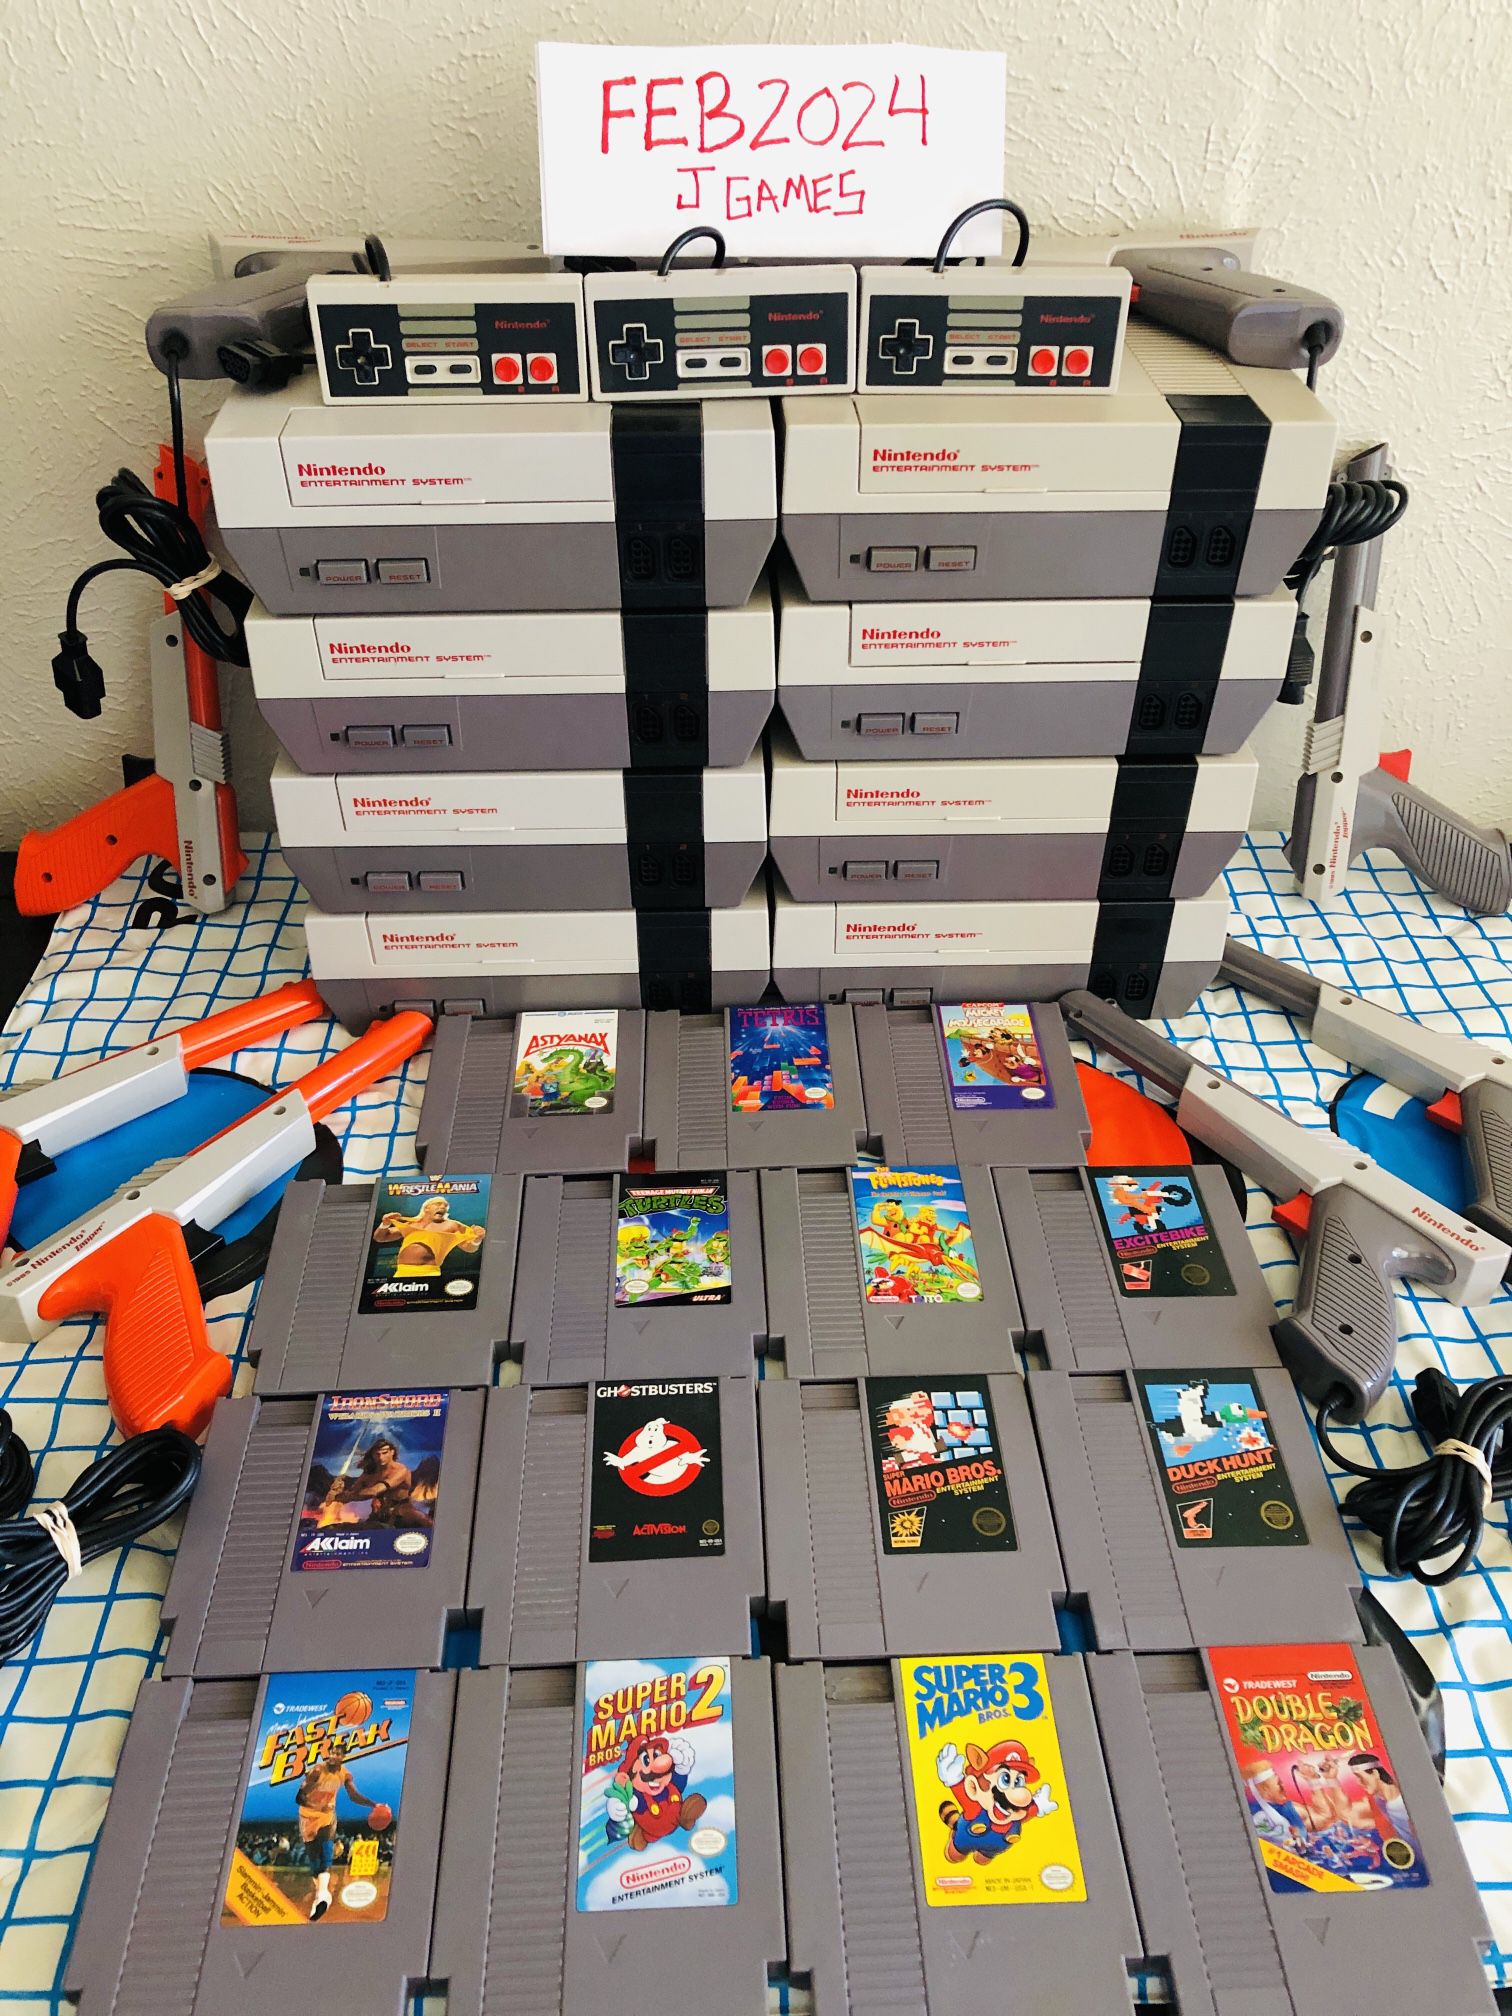 Nintendo Entertainment System (NES) Fully Restored/ Like New Systems 